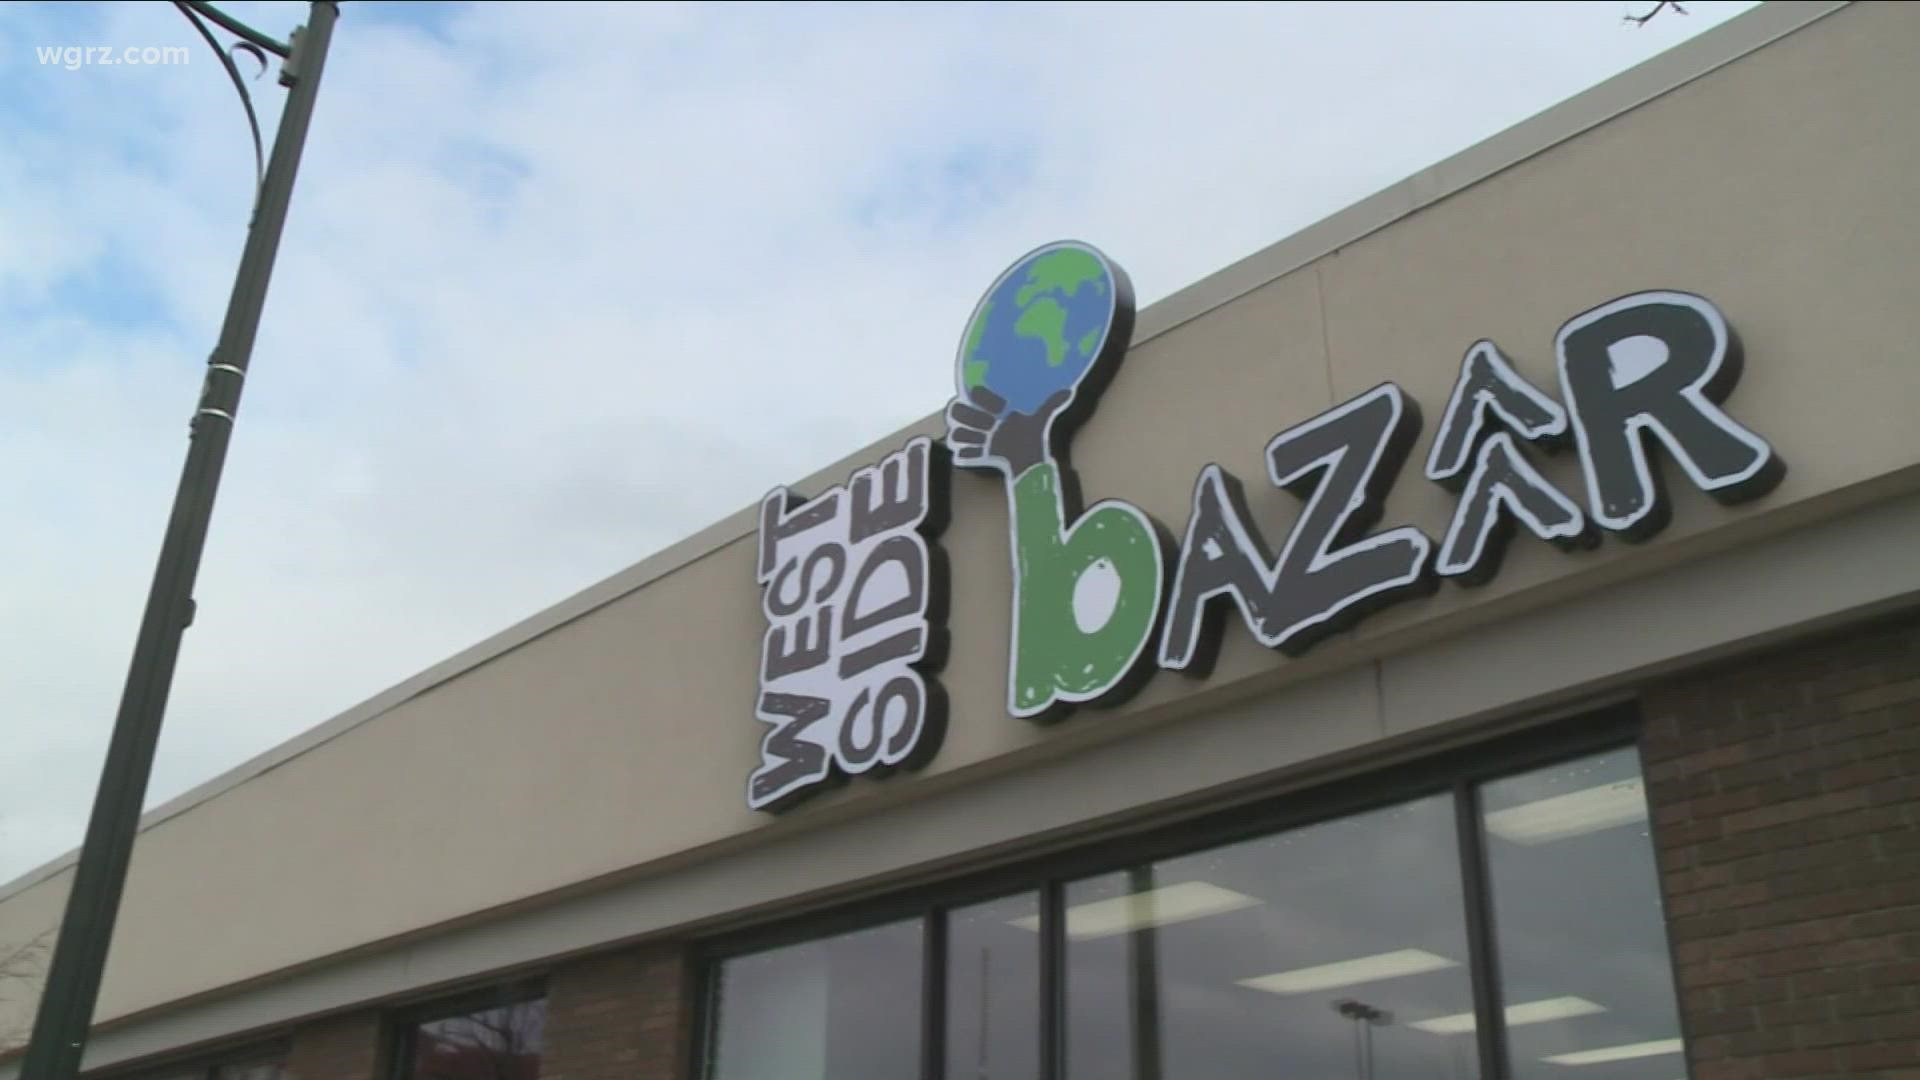 The West Side Bazaar is getting a new home soon on Niagara Street. To help with the, the federal government has announced nearly a million dollars in funding.